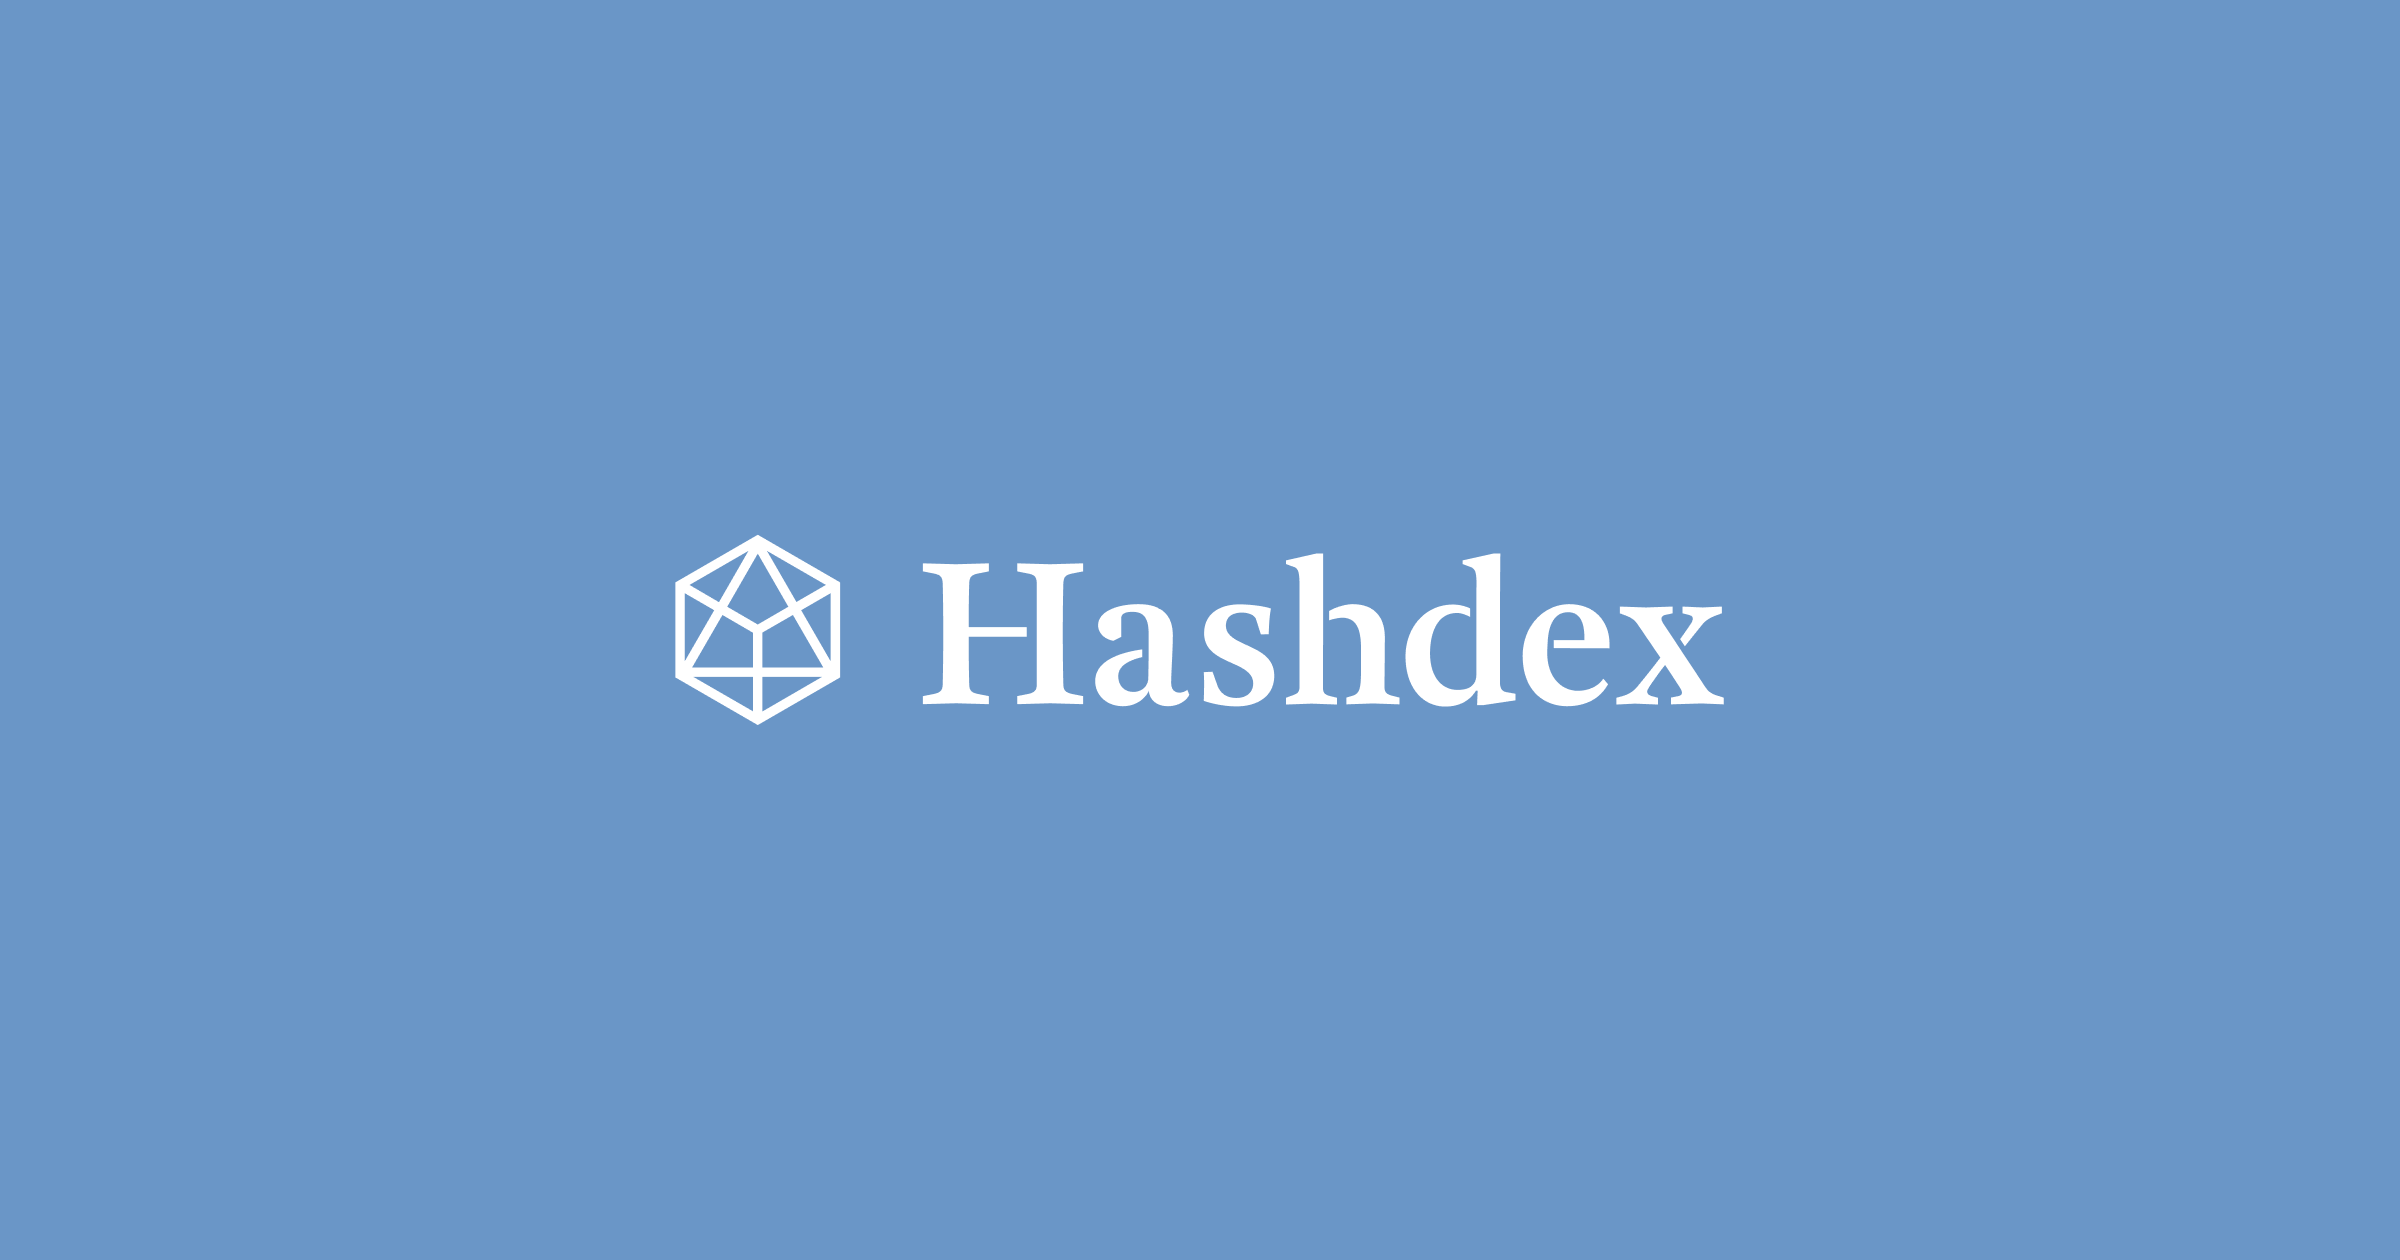 Hashdex set to launch world's first pure-play DeFi index, DEFI11, powered by CF DeFi Composite Index